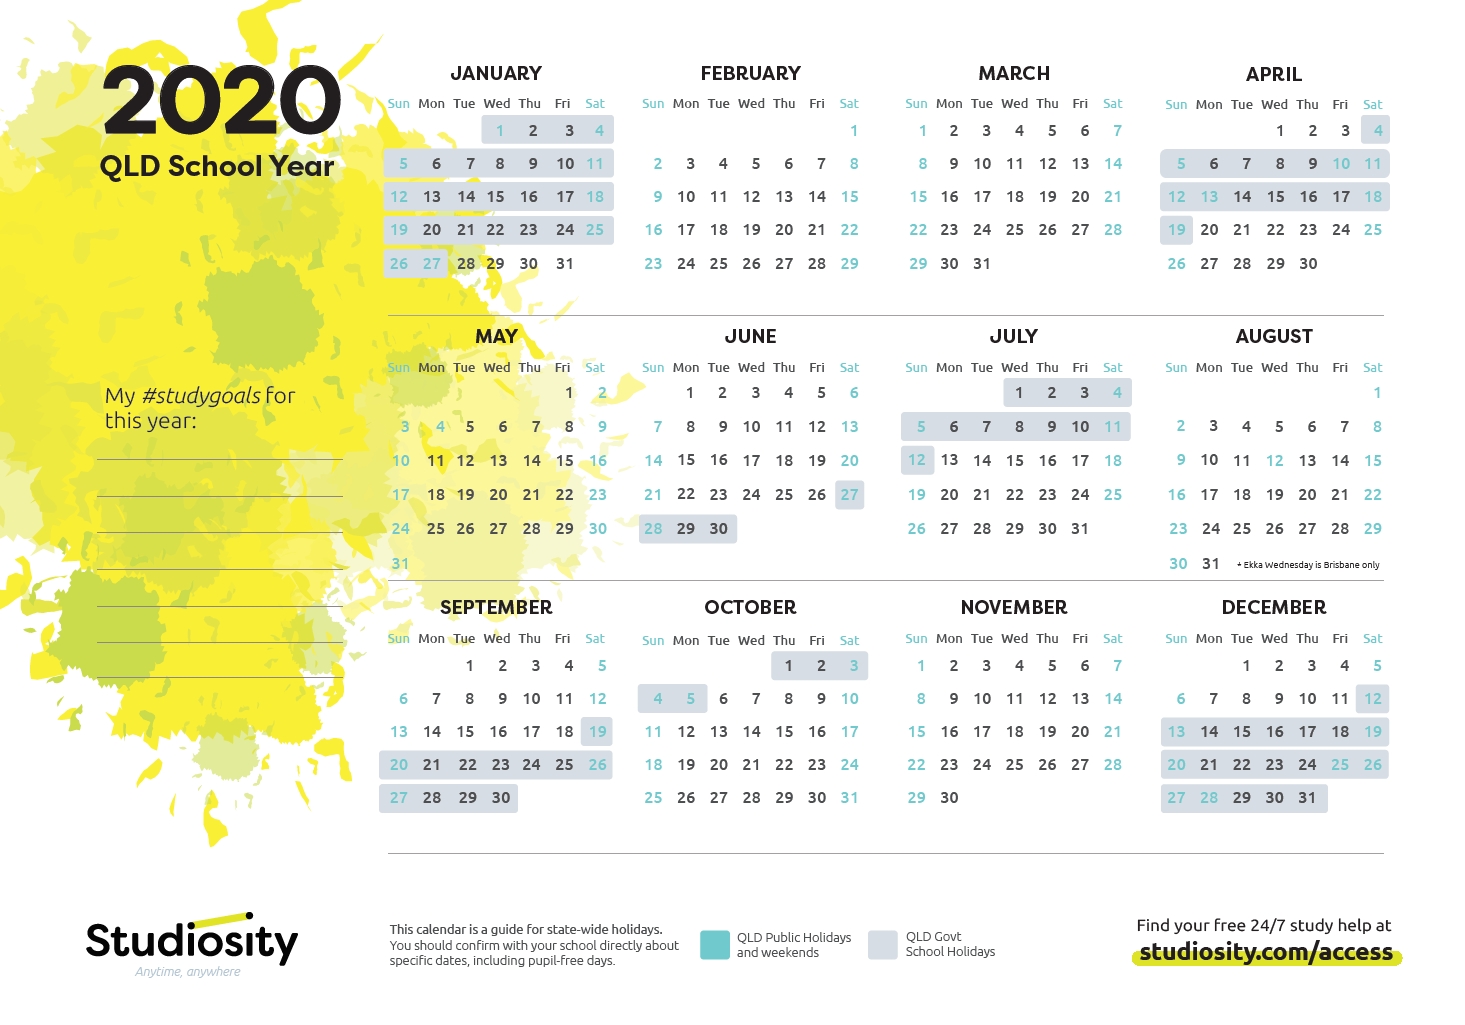 School Terms And Public Holiday Dates For Qld In 2020